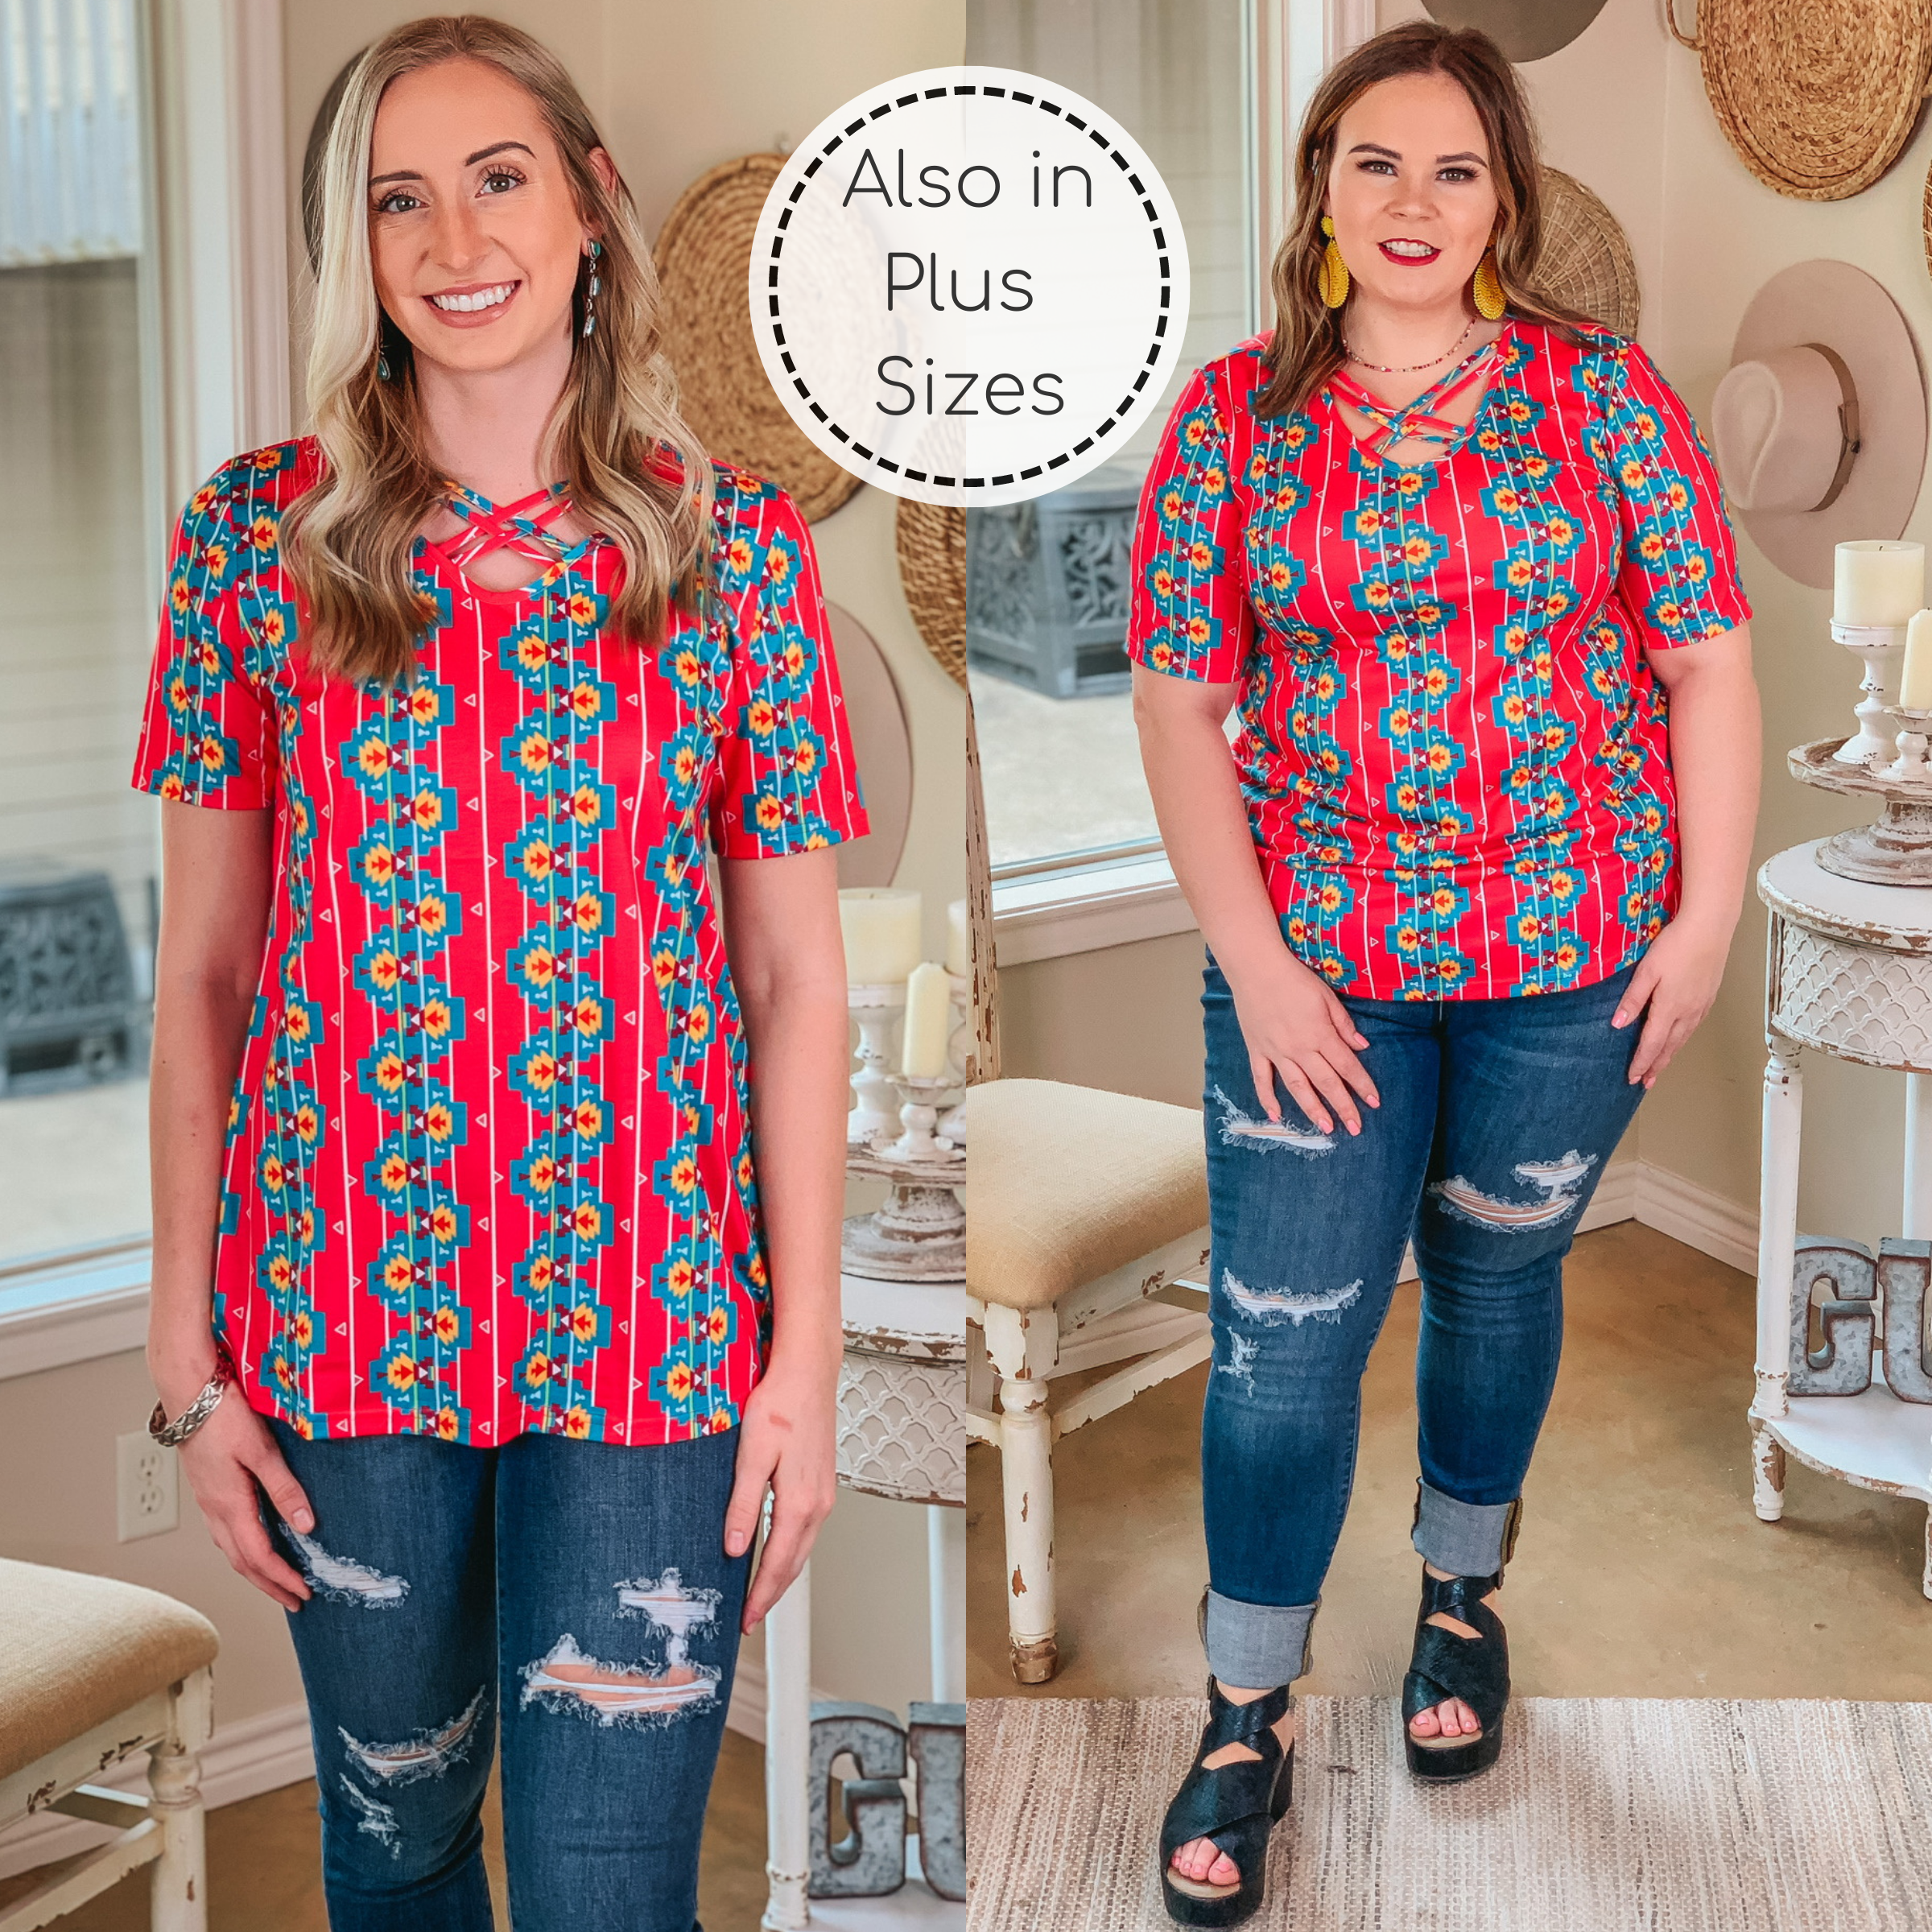 Last Chance Size Small | Take Me to Tucson Criss-Cross Neck Aztec Print Top in Hot Pink - Giddy Up Glamour Boutique